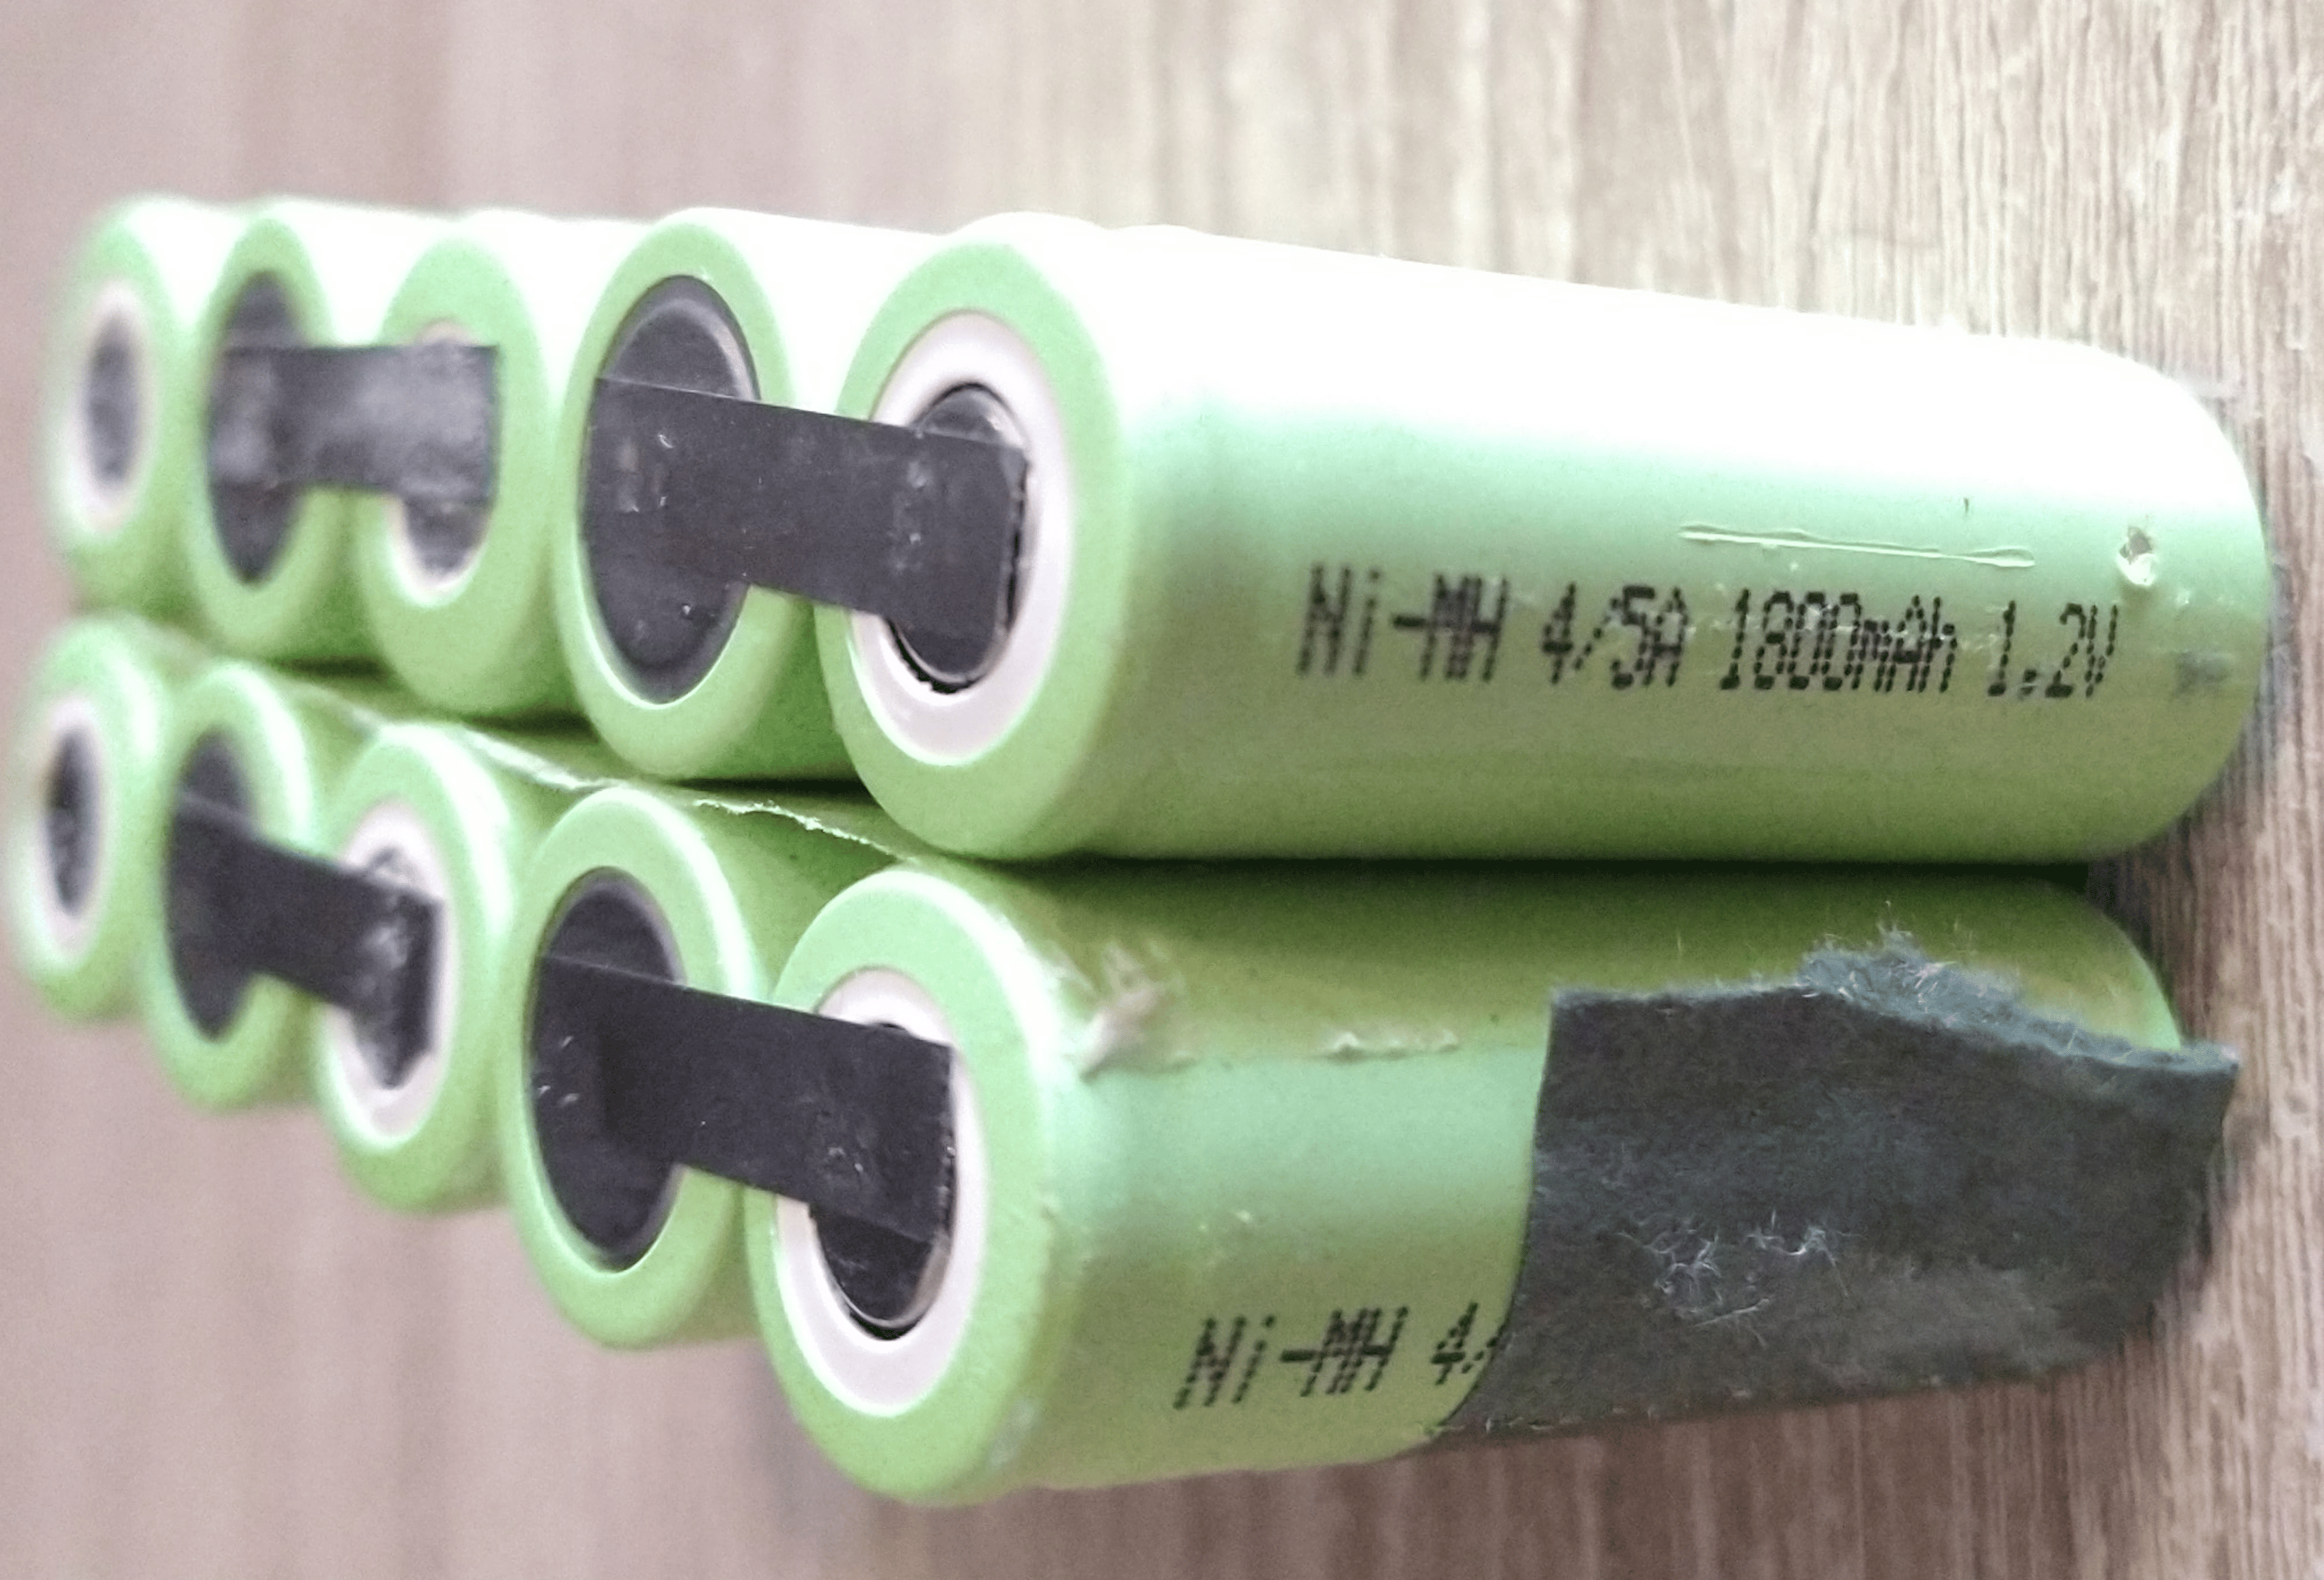 Batteries from alternative brand for the camcorder